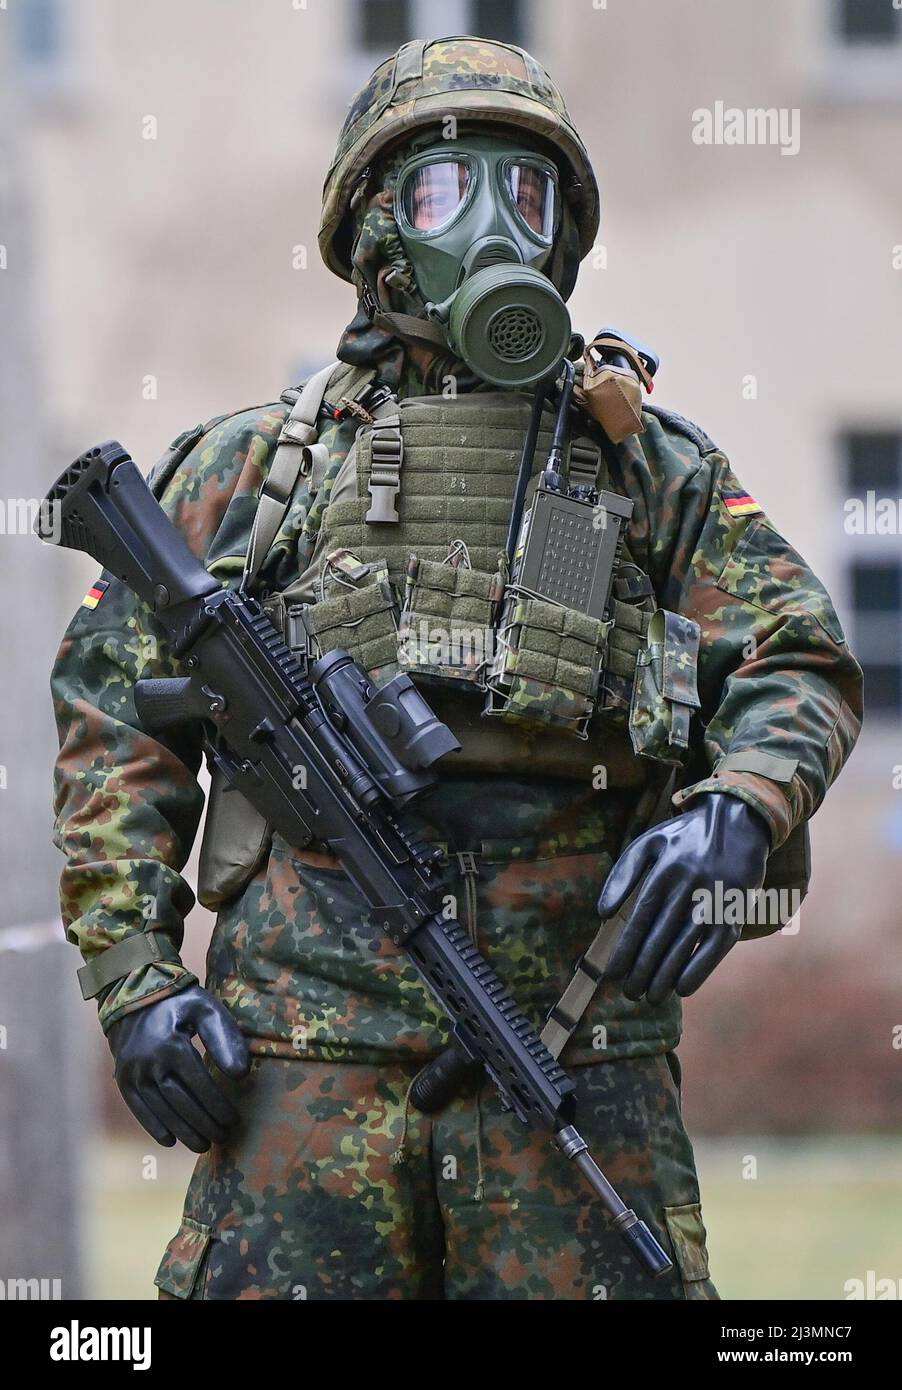 06 April 2022, Brandenburg, Strausberg: A soldier of the German Armed  Forces wears a gas mask, protective equipment and a Heckler and Koch G36  assault rifle on the sidelines of the ceremonial